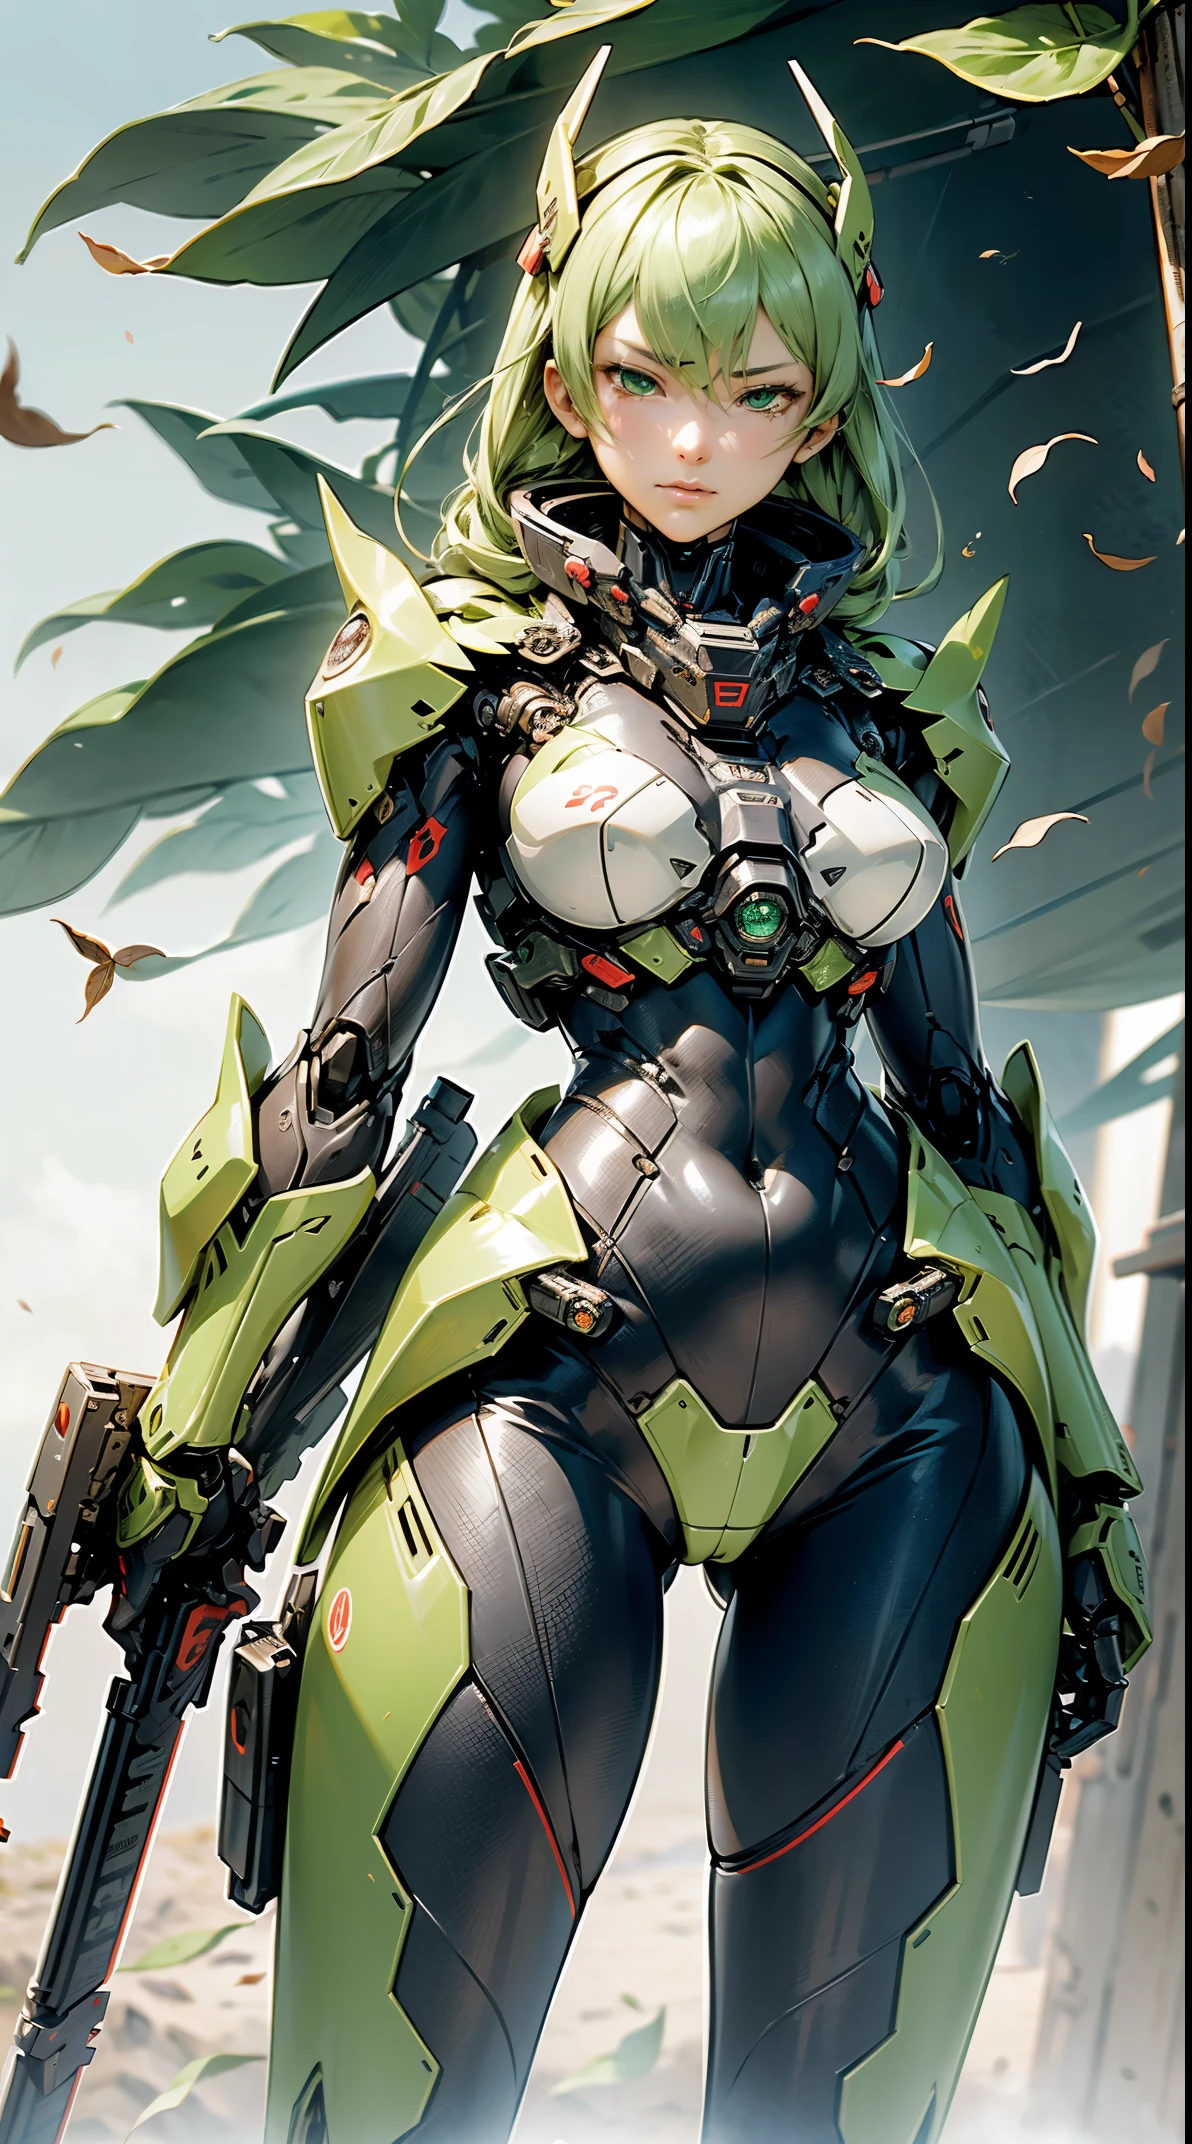 (masutepiece,Extremely detailed, Heavy mechs, hard surface),(concept art:1.1),(Armored Core Style:0.8), A woman wearing ninja robo armor is standing,(light green body:1.1),(long legged:1.1),(equipped with a gun:1.1),(A detailed eye:1.3),(A detailed face:1.3),(Detailed weapons:1.3),(Detailed body:1.3),((full bodyesbian:1.5)),(In the background, leaves are scattered by the wind.:1.5),逼真